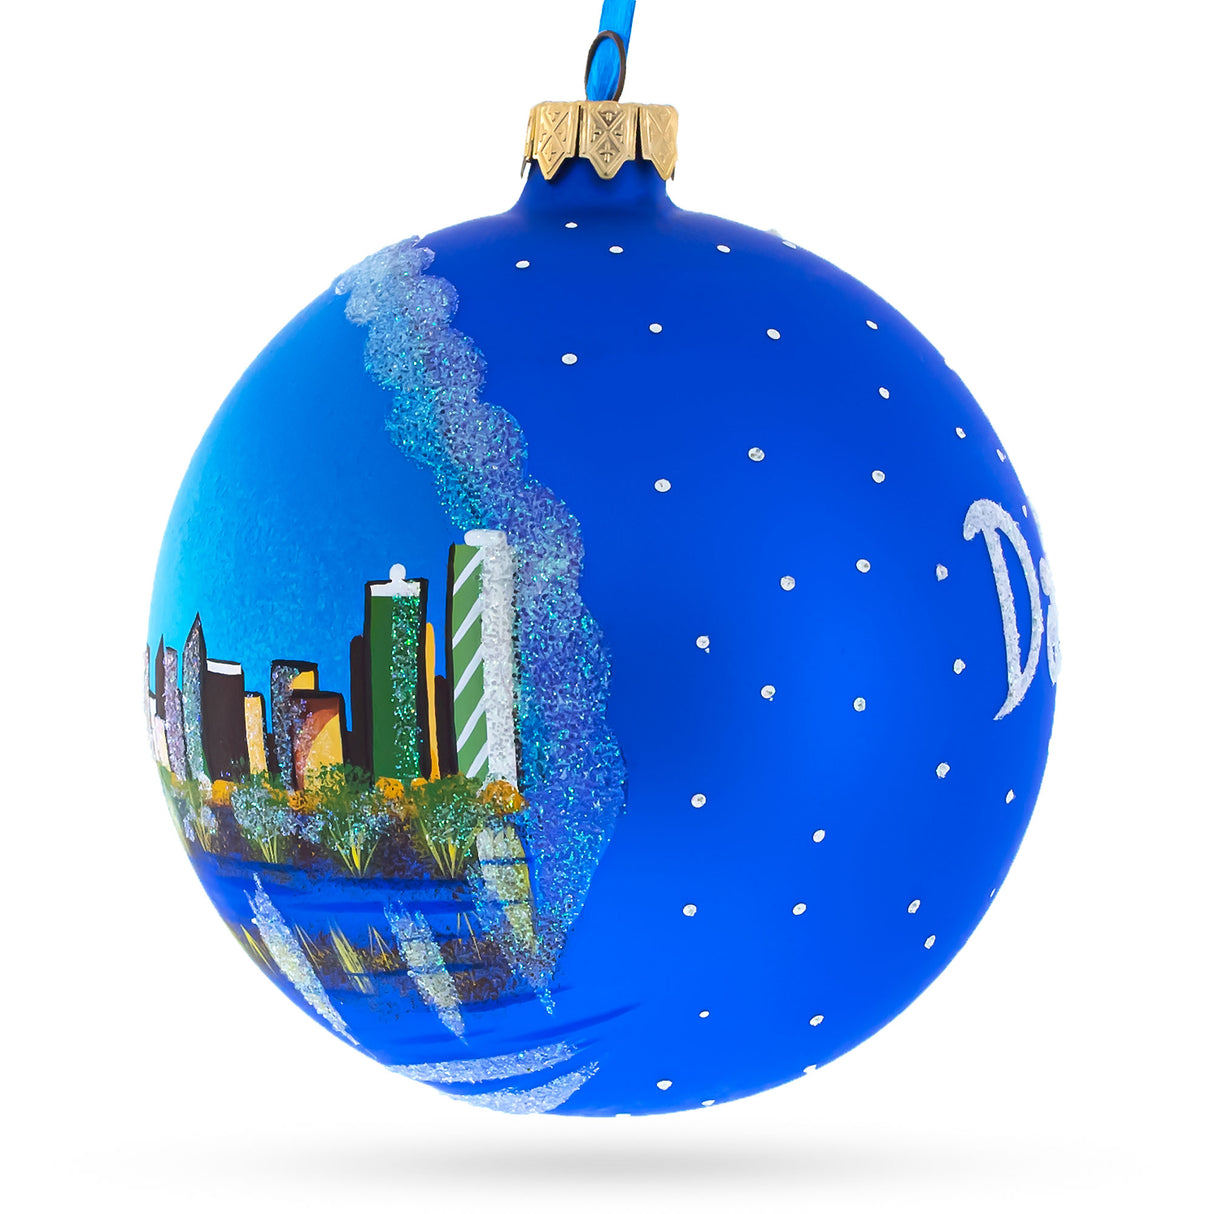 Buy Christmas Ornaments > Travel > North America > USA > Texas by BestPysanky Online Gift Ship